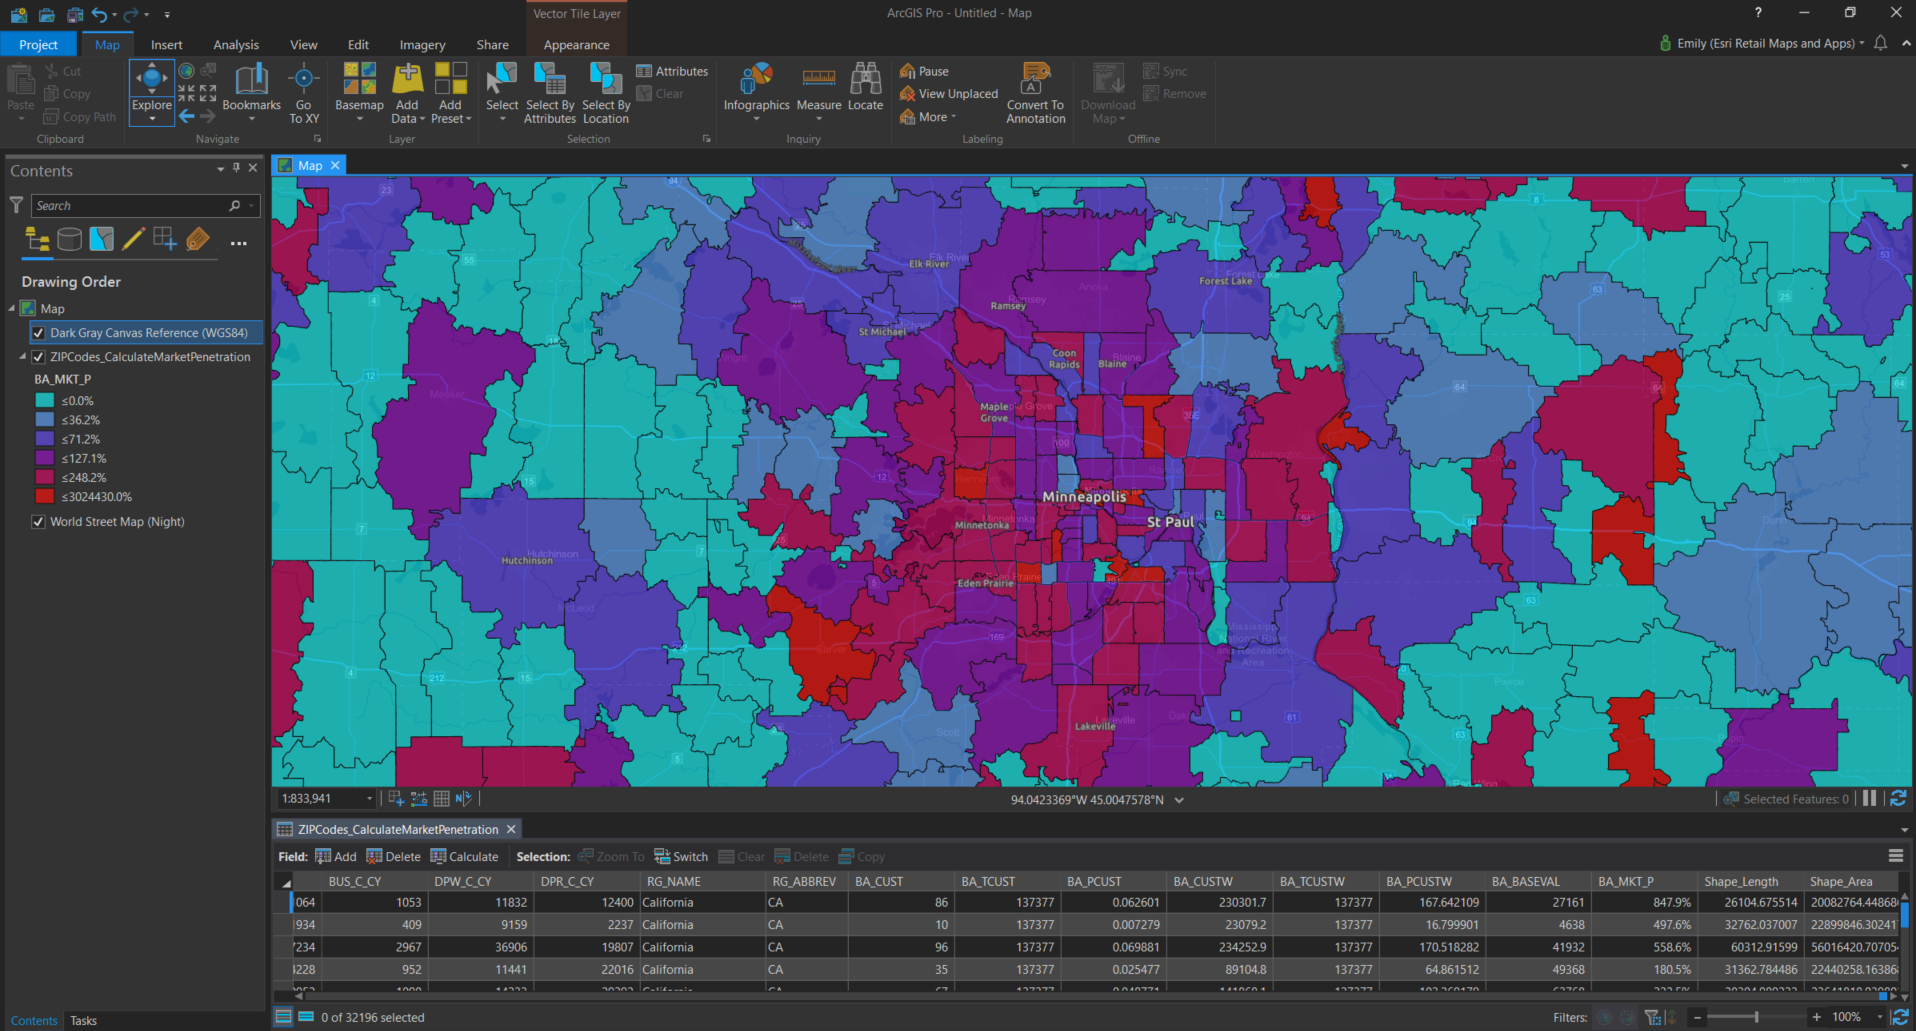 A Market Penetration layer calculated using population of zip codes compared to a point layer of customer data and weighted using their spending totals. This helps us see areas where we have more saturation (red) and areas where we have gaps in our market (shades of blue and purple).